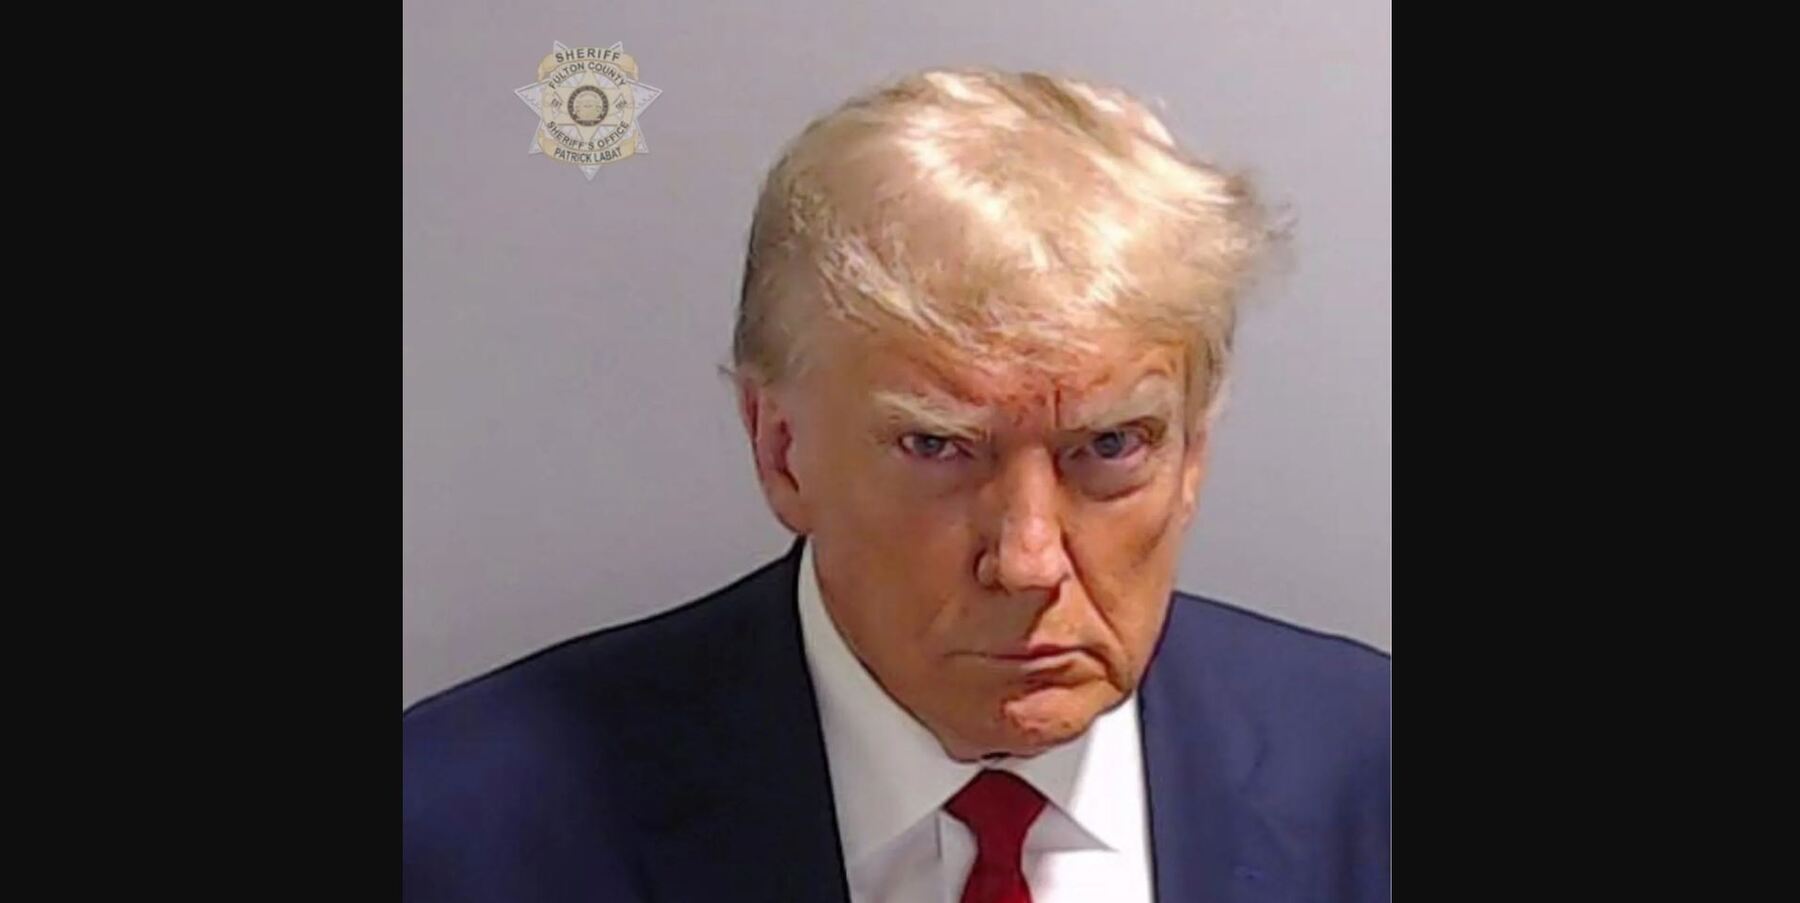 The booking photograph of Donald J. Trump. PHOTOGRAPH: FULTON COUNTY SHERIFF'S OFFICE/GETTY IMAGES